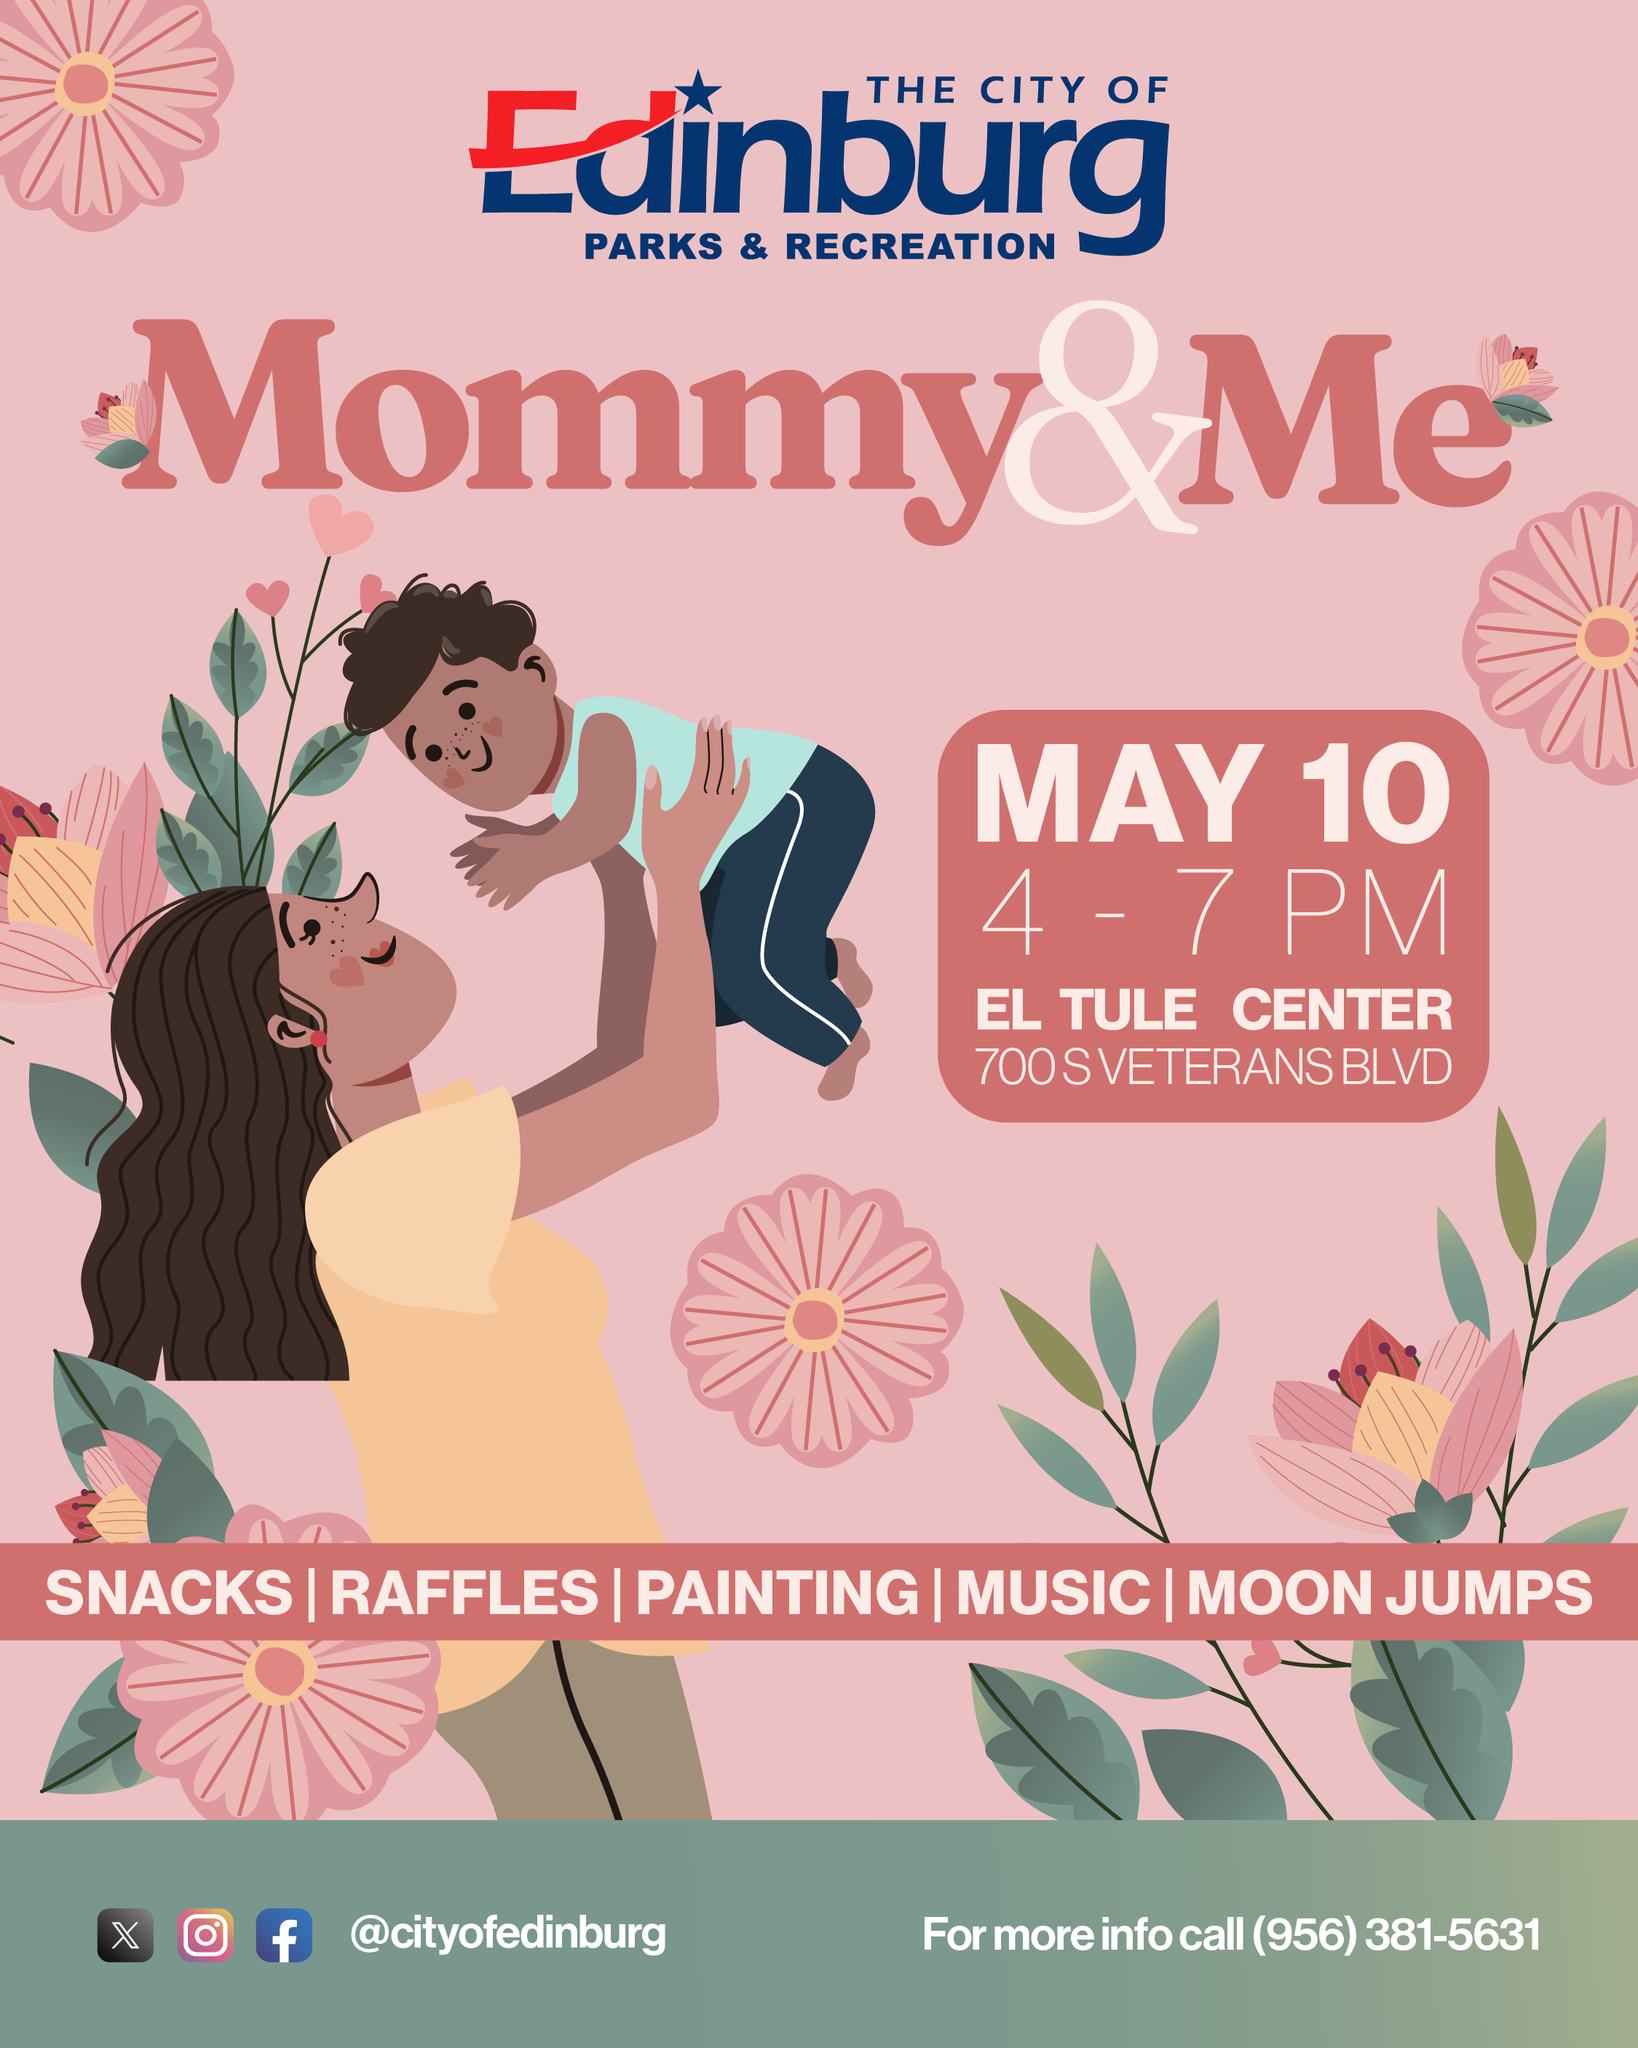 Calling All Moms for the Annual Mommy & Me Event